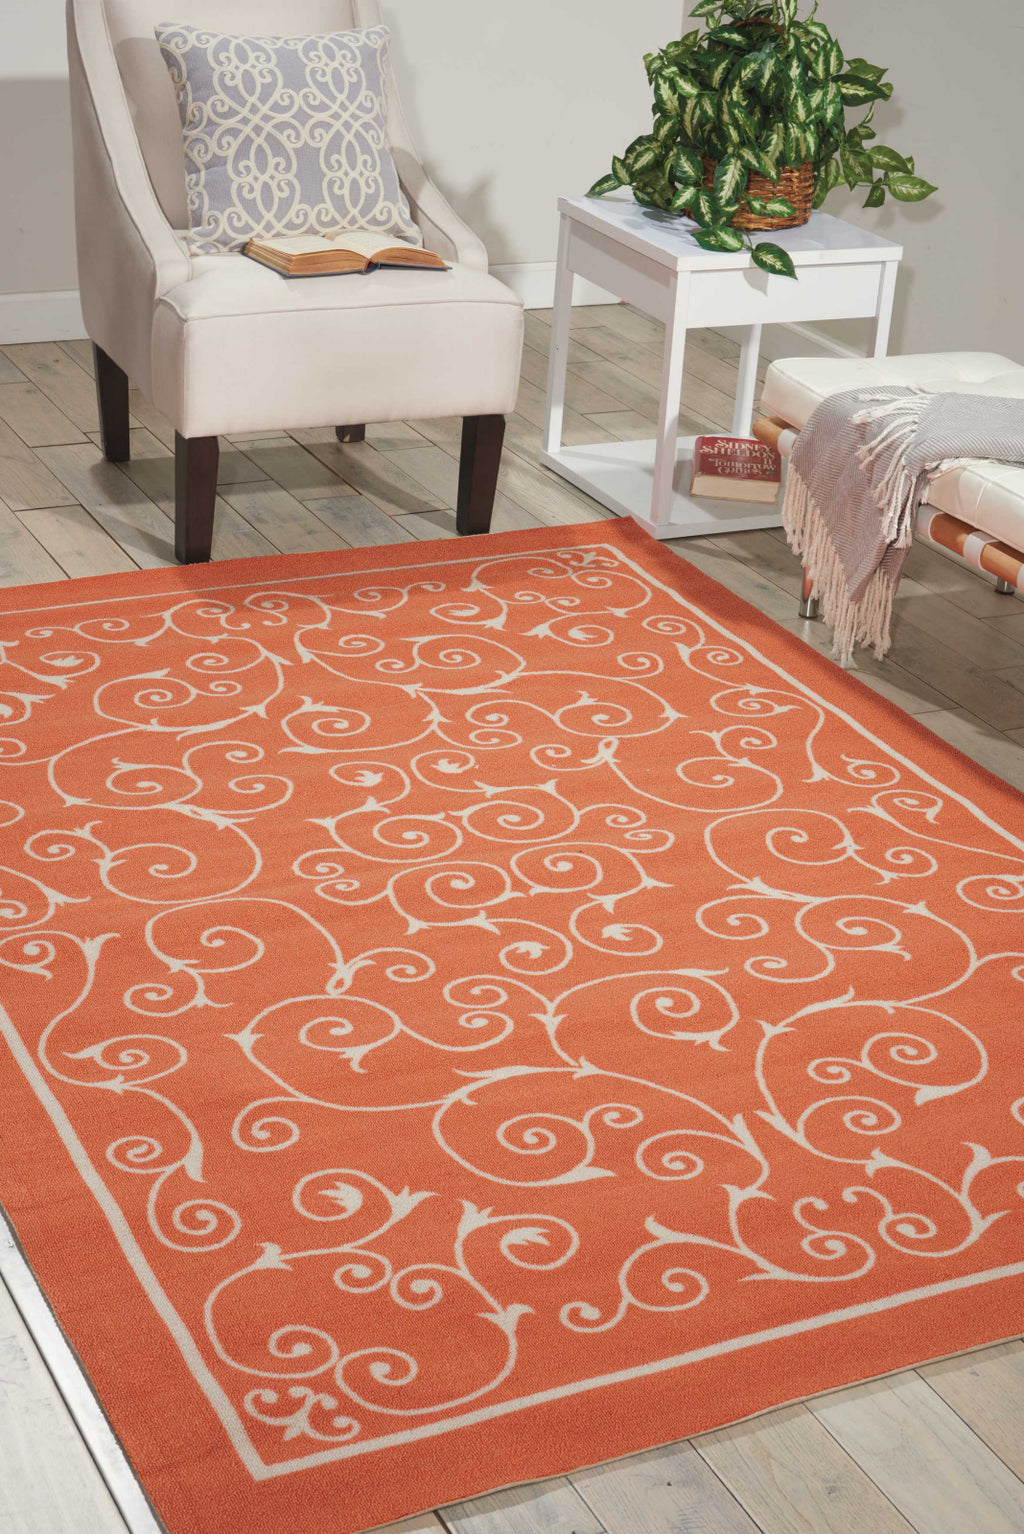 Nourison Home and Garden RS019 Orange Area Rug Room Image Feature